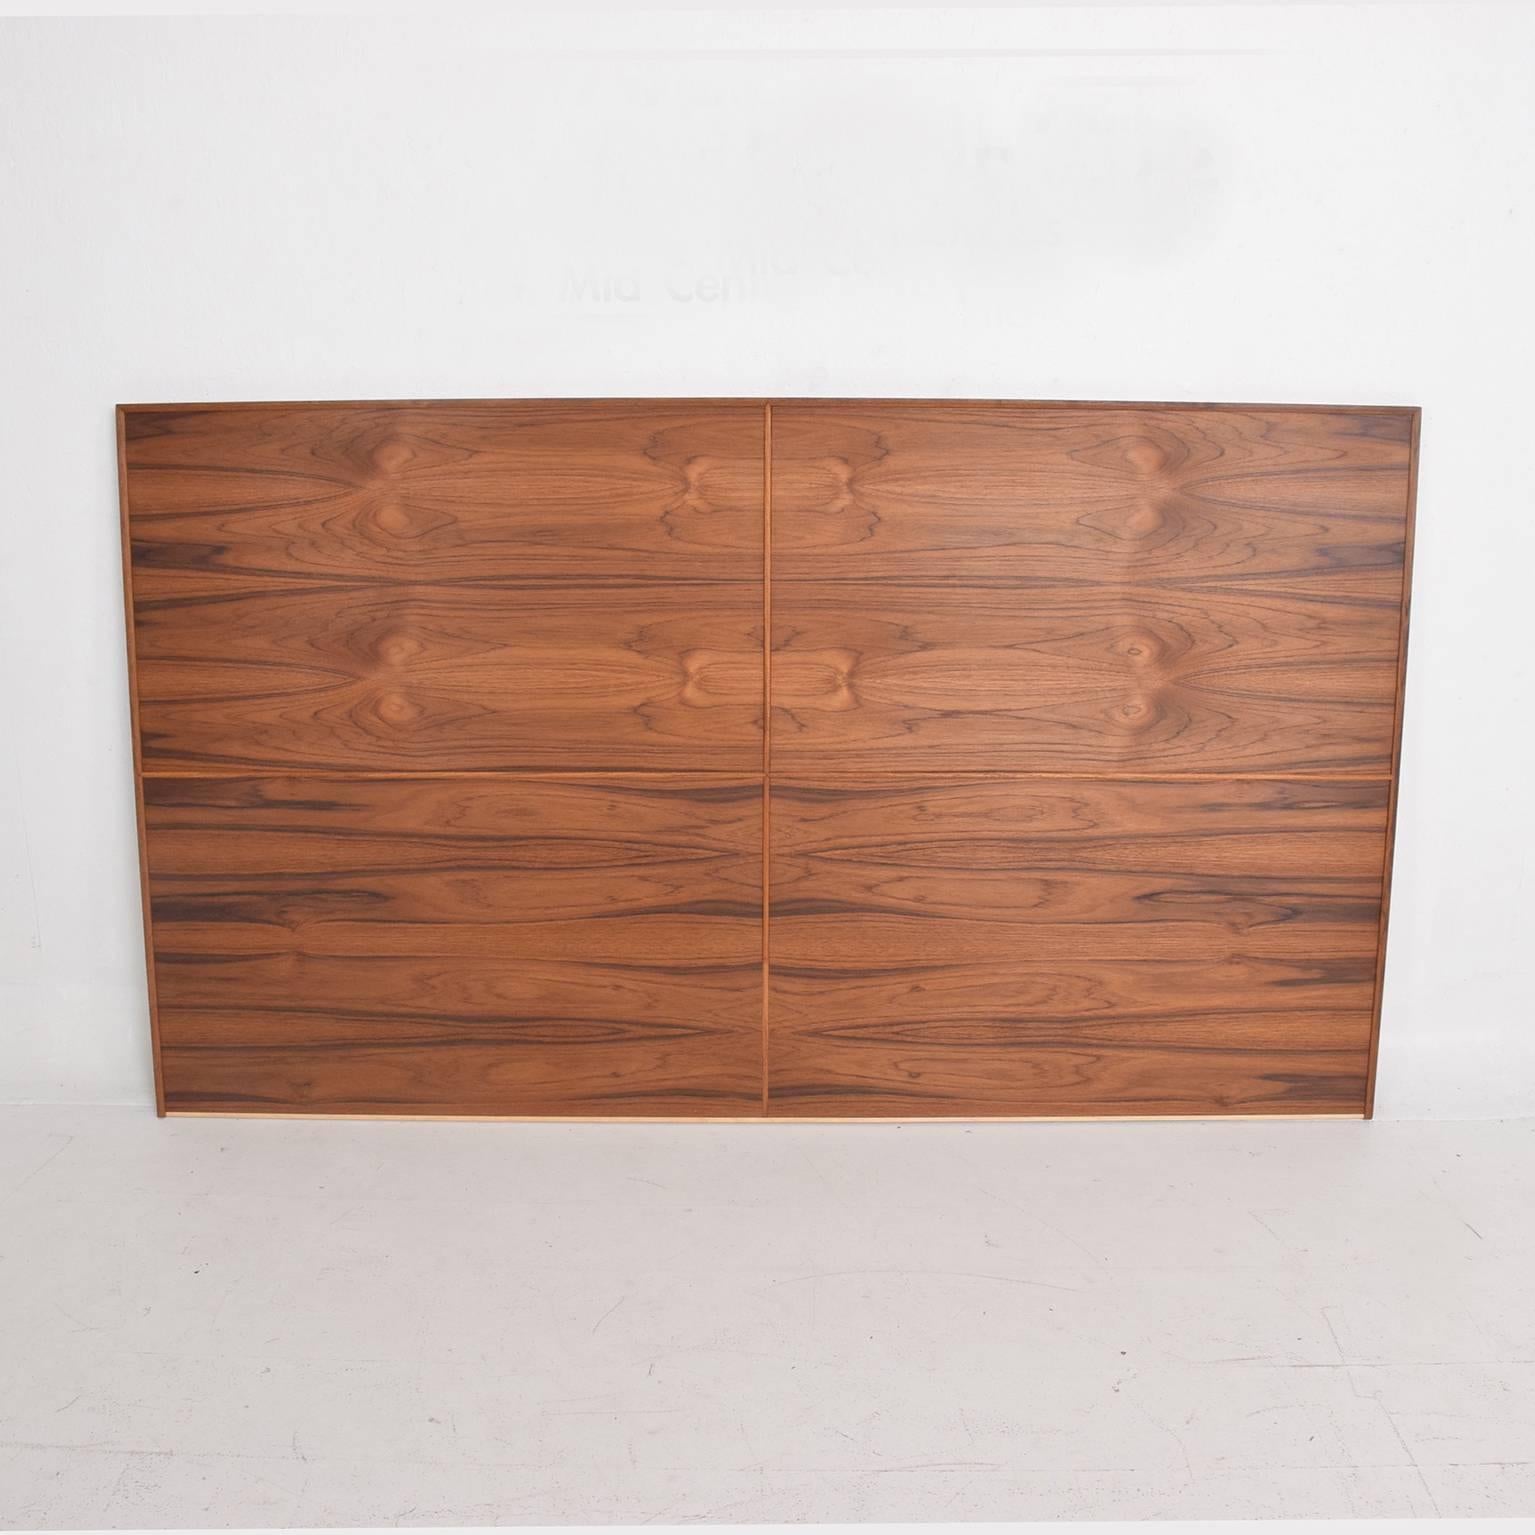 For your consideration a custom teak queen-size headboard. Designed by Pablo Romo for AMBIANIC.
Item in picture is no longer available. Will design and built to meet customer specifications.
Dimensions: 63